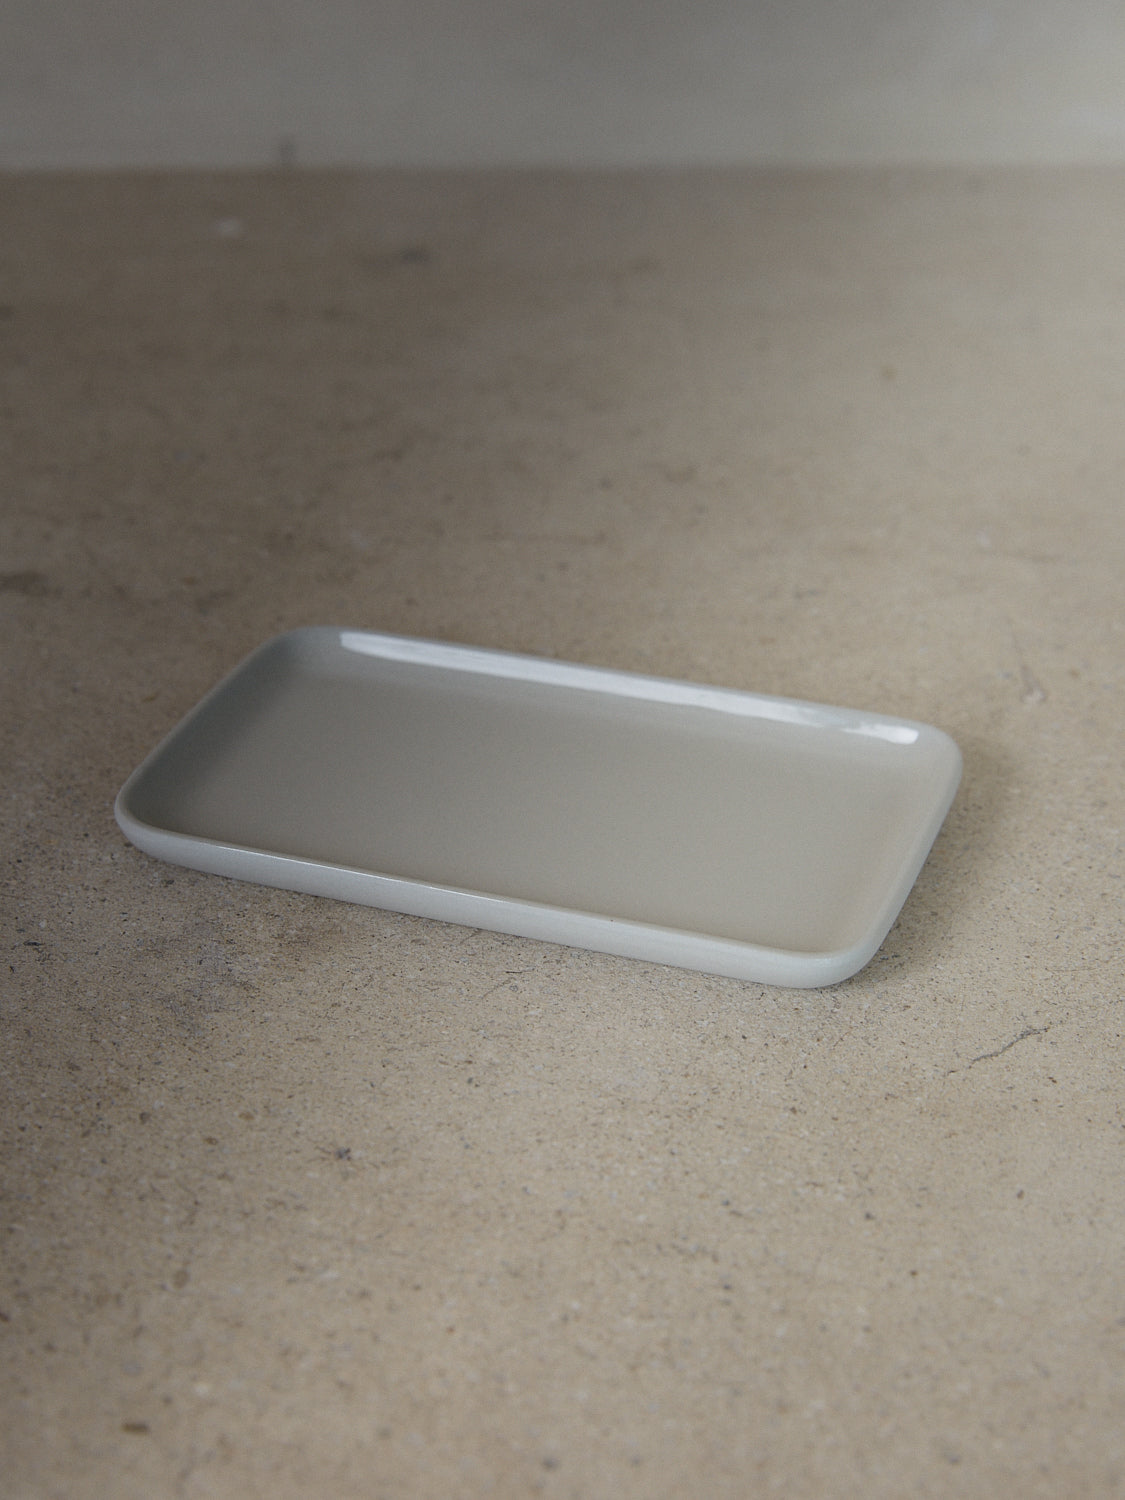 Cose Tray. A study in refined simplicity, the Cose Tray by Bertrand Lejoly for Serax adds subtle luxury to any bathroom or kitchen.